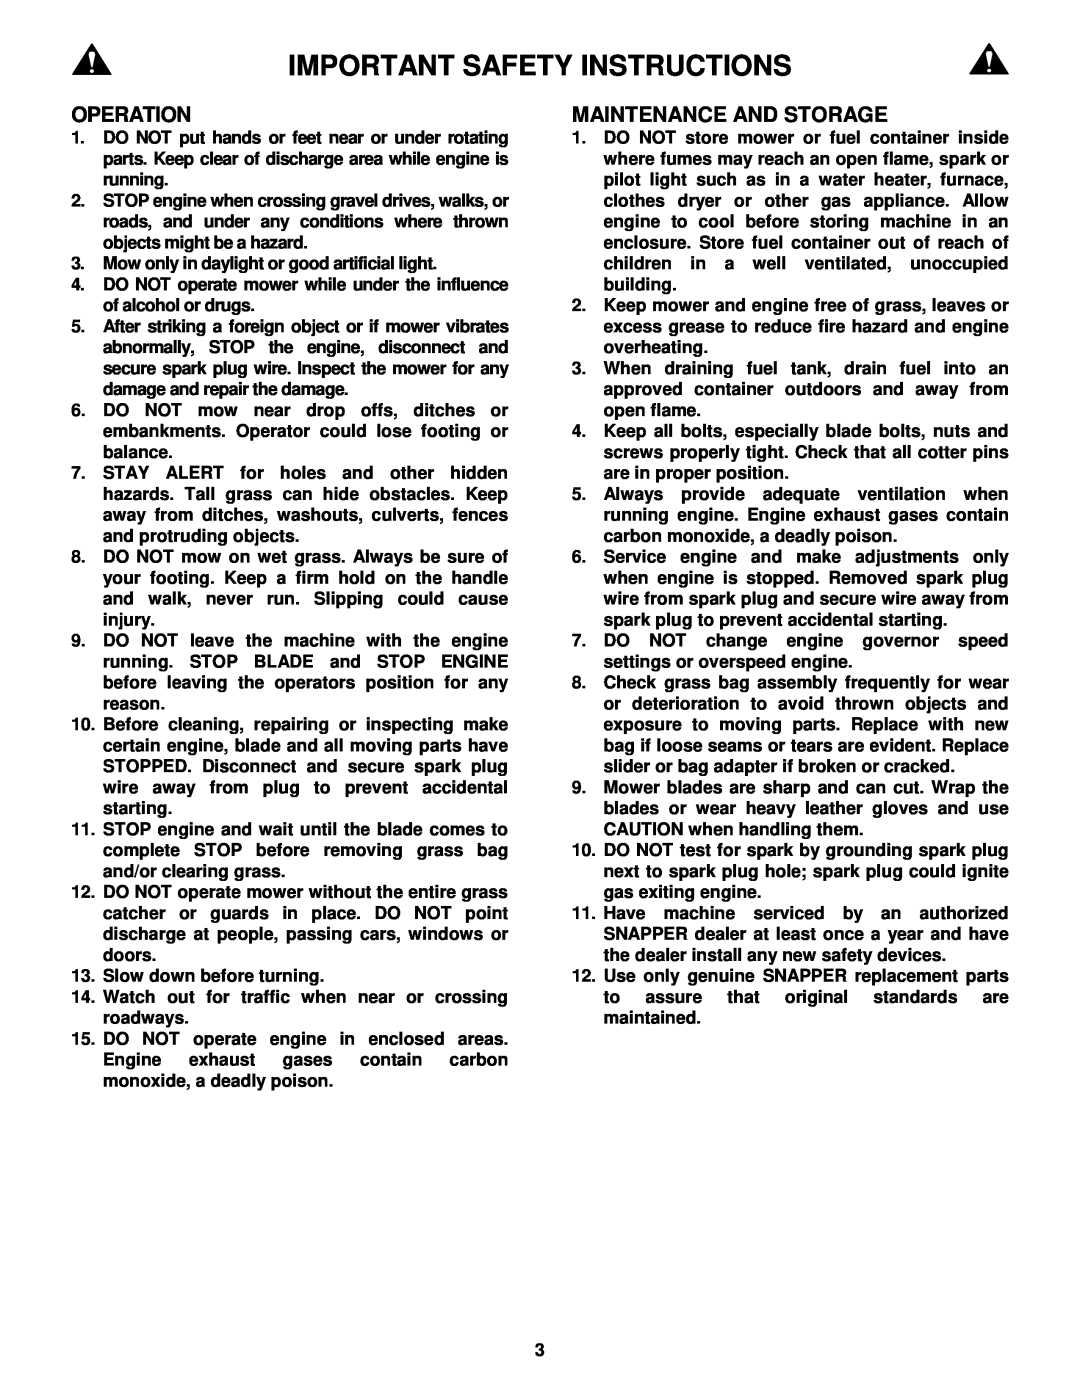 Snapper FRP216016 important safety instructions Important Safety Instructions, Operation, Maintenance And Storage 